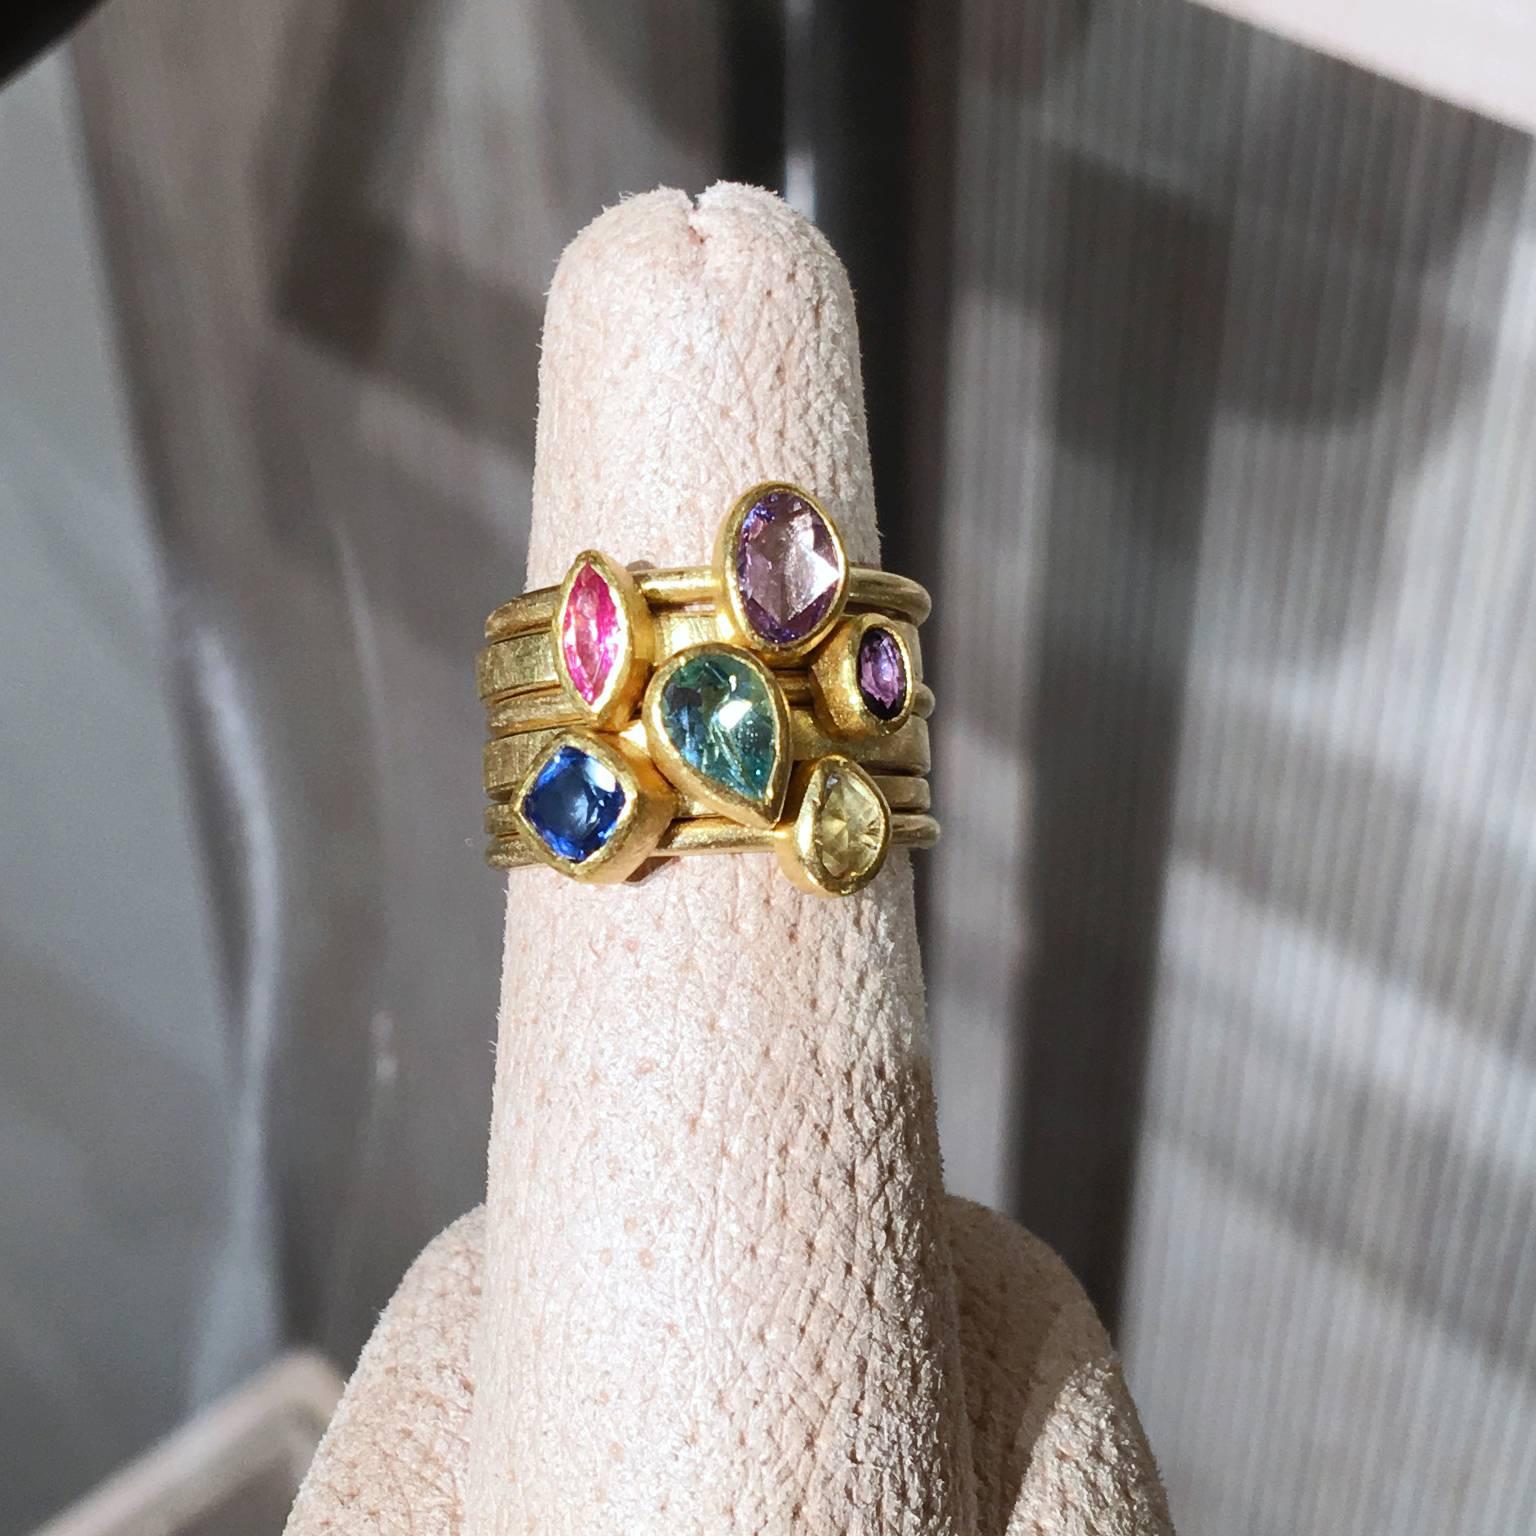 One-of-a-Kind Stacking Ring Set (also available individually) handcrafted by jewelry artist Petra Class with assorted width 22k yellow gold and 18k yellow gold bands. Showcasing bezel-set gemstones from top to bottom:

Pale Pink Abstract Oval